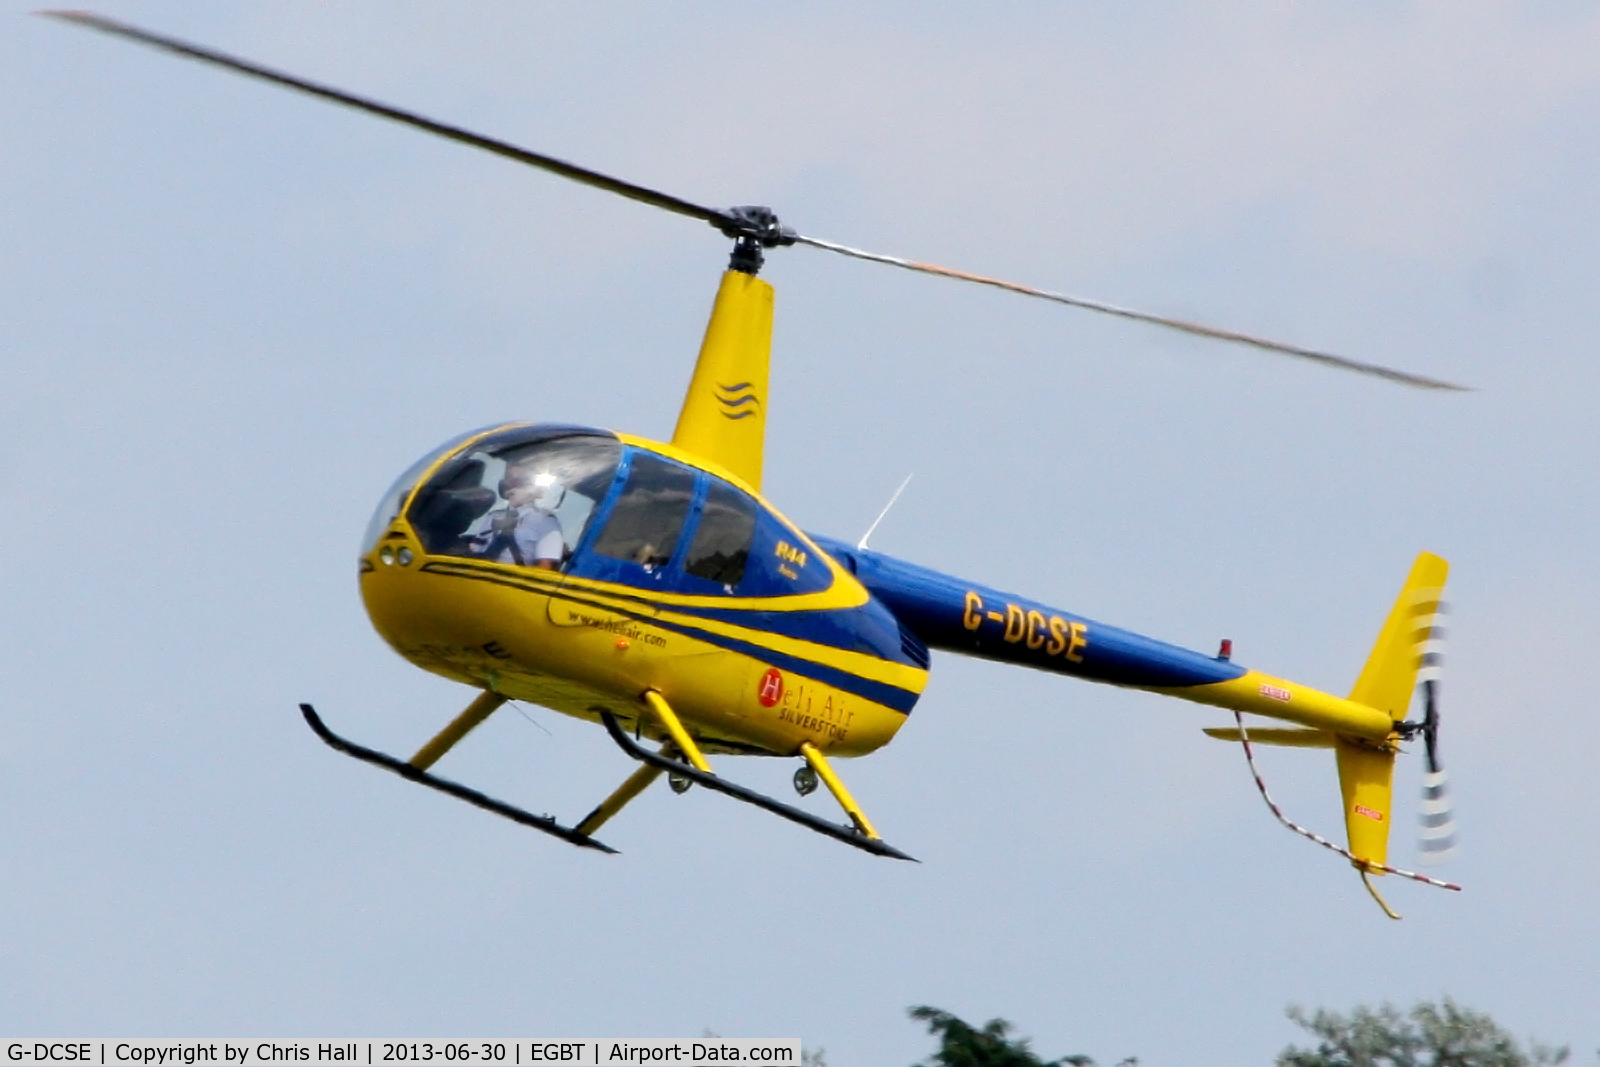 G-DCSE, 1999 Robinson R44 Astro C/N 0659, being used for ferrying race fans to the British F1 Grand Prix at Silverstone